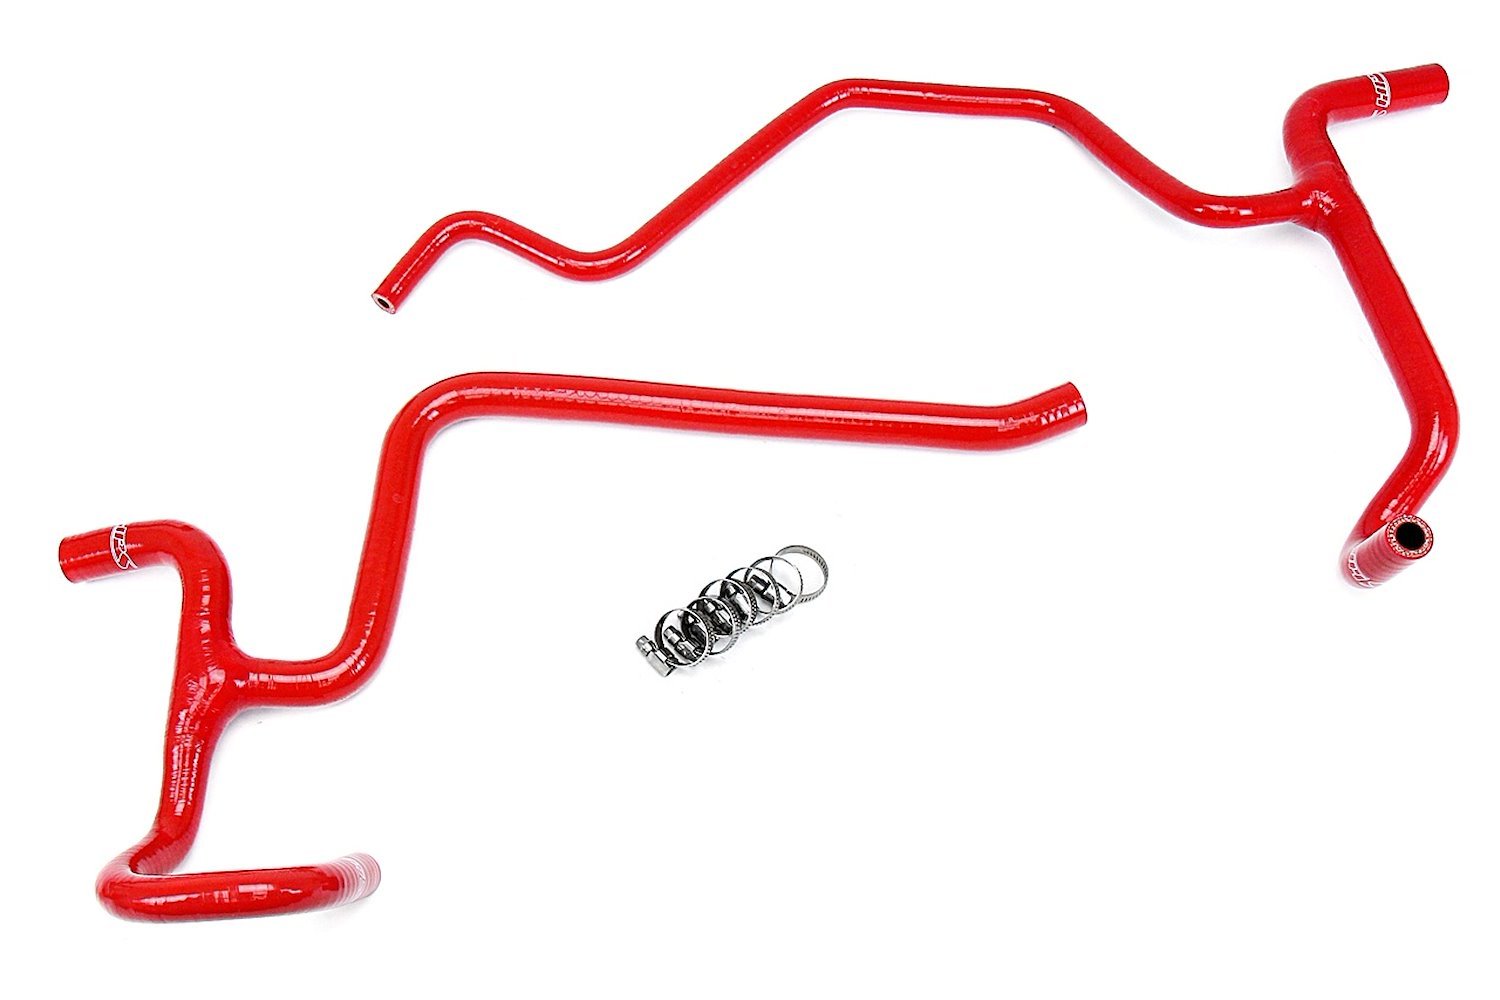 57-1326H-RED Heater Hose Kit, High-Temp 3-Ply Reinforced Silicone, Replaces OEM Rubber Heater Coolant Hoses